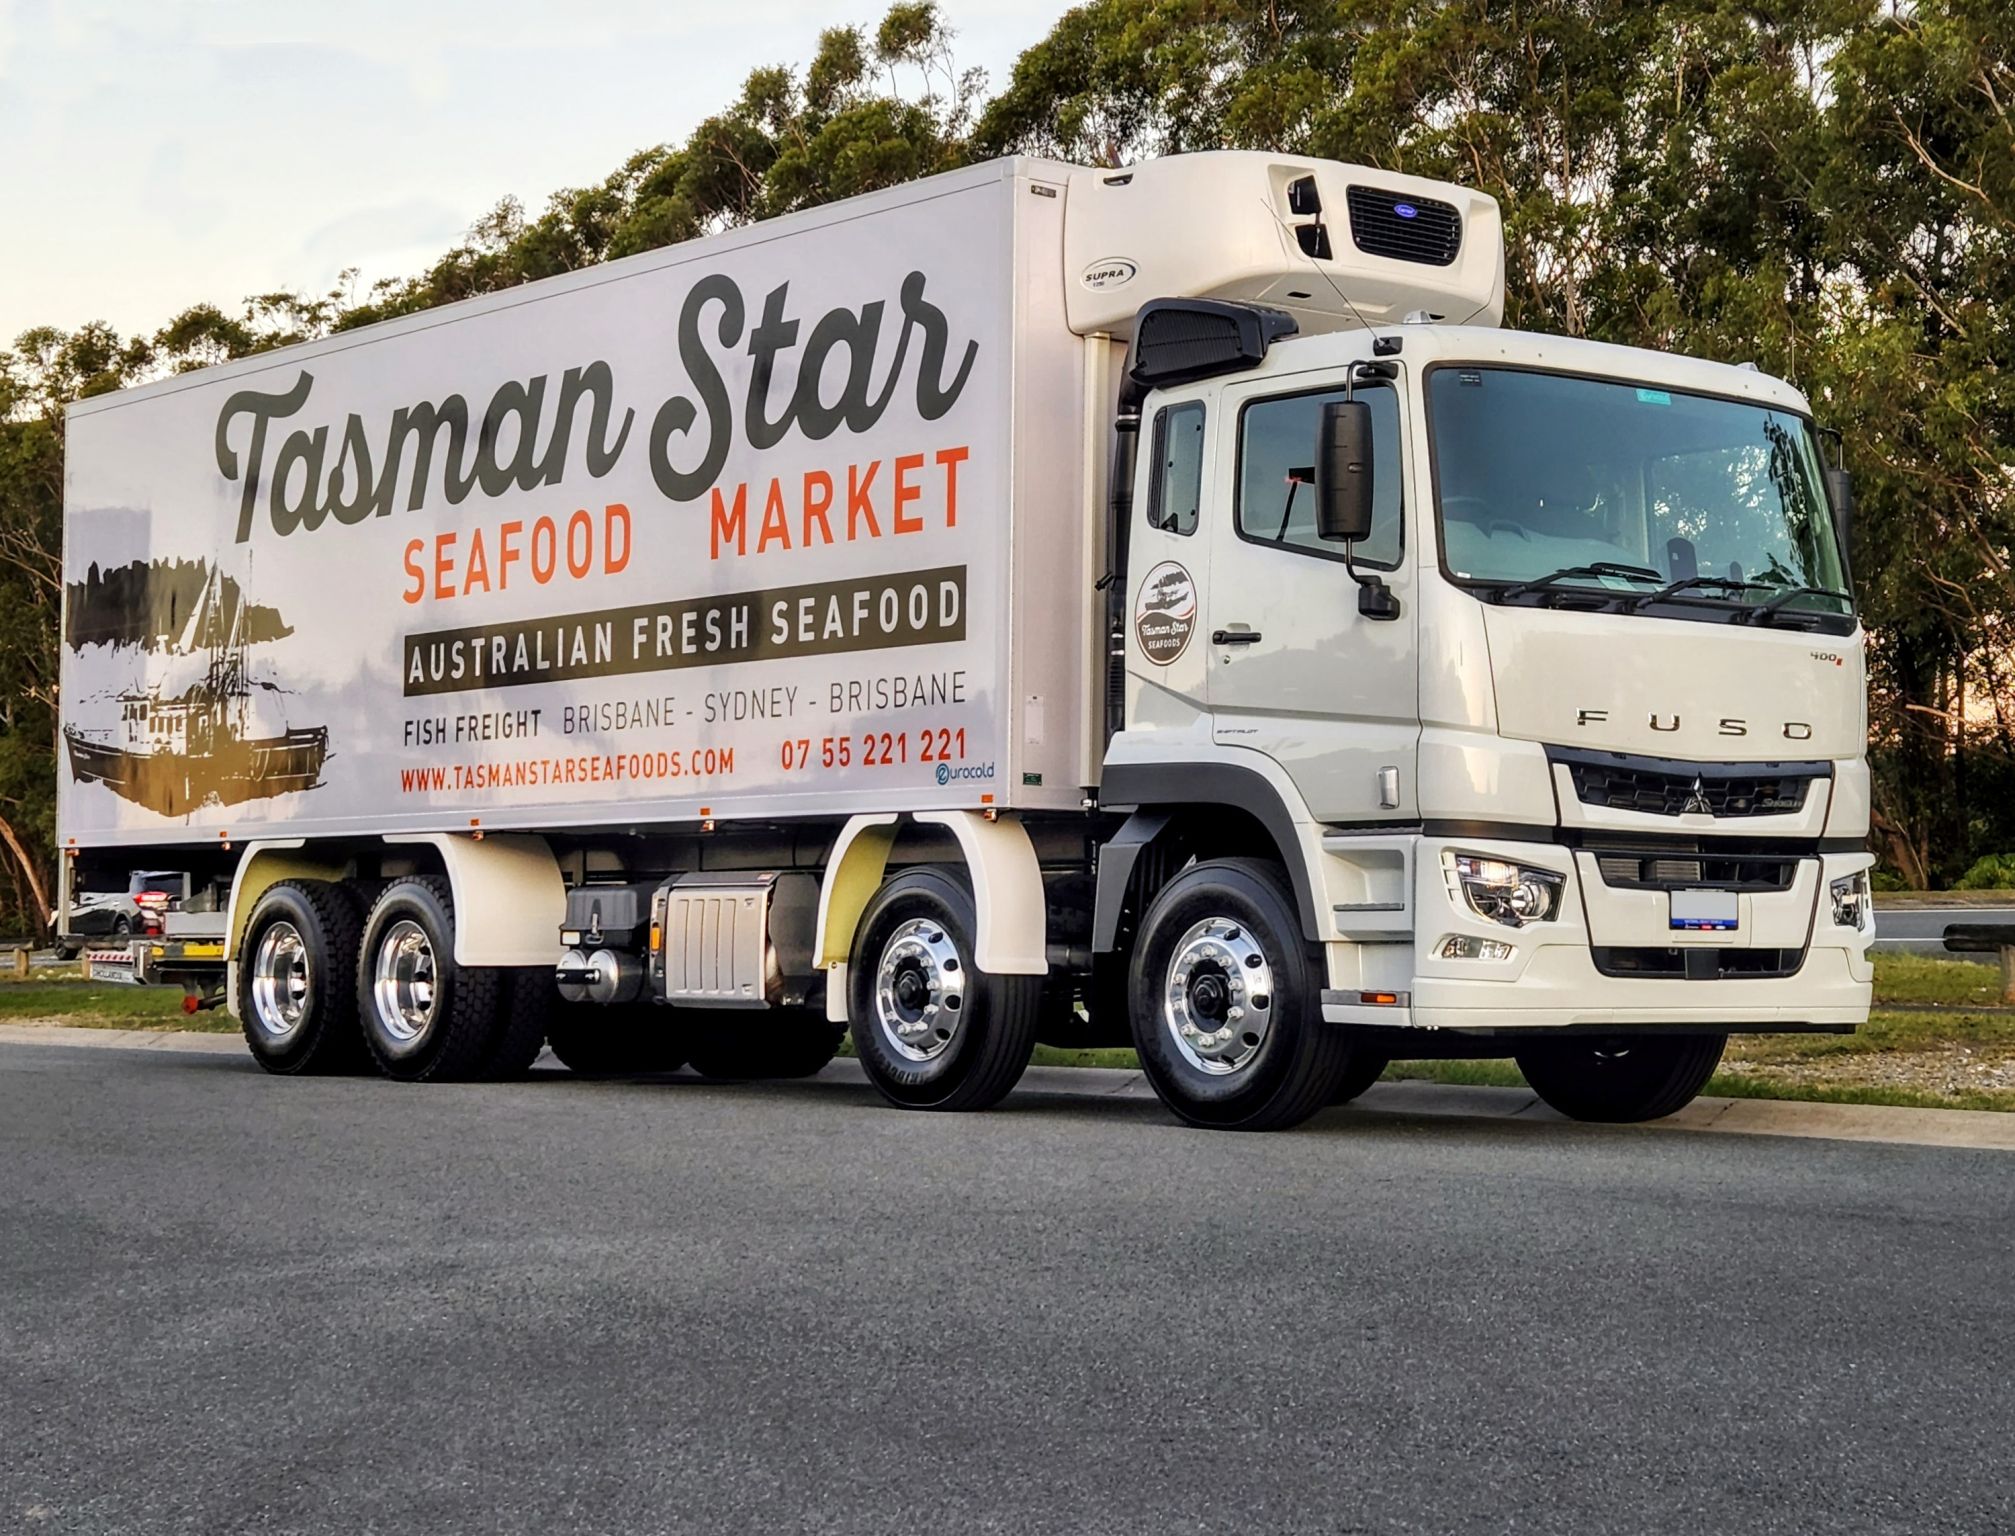 The Fuso Shogun 510 often gets the attention